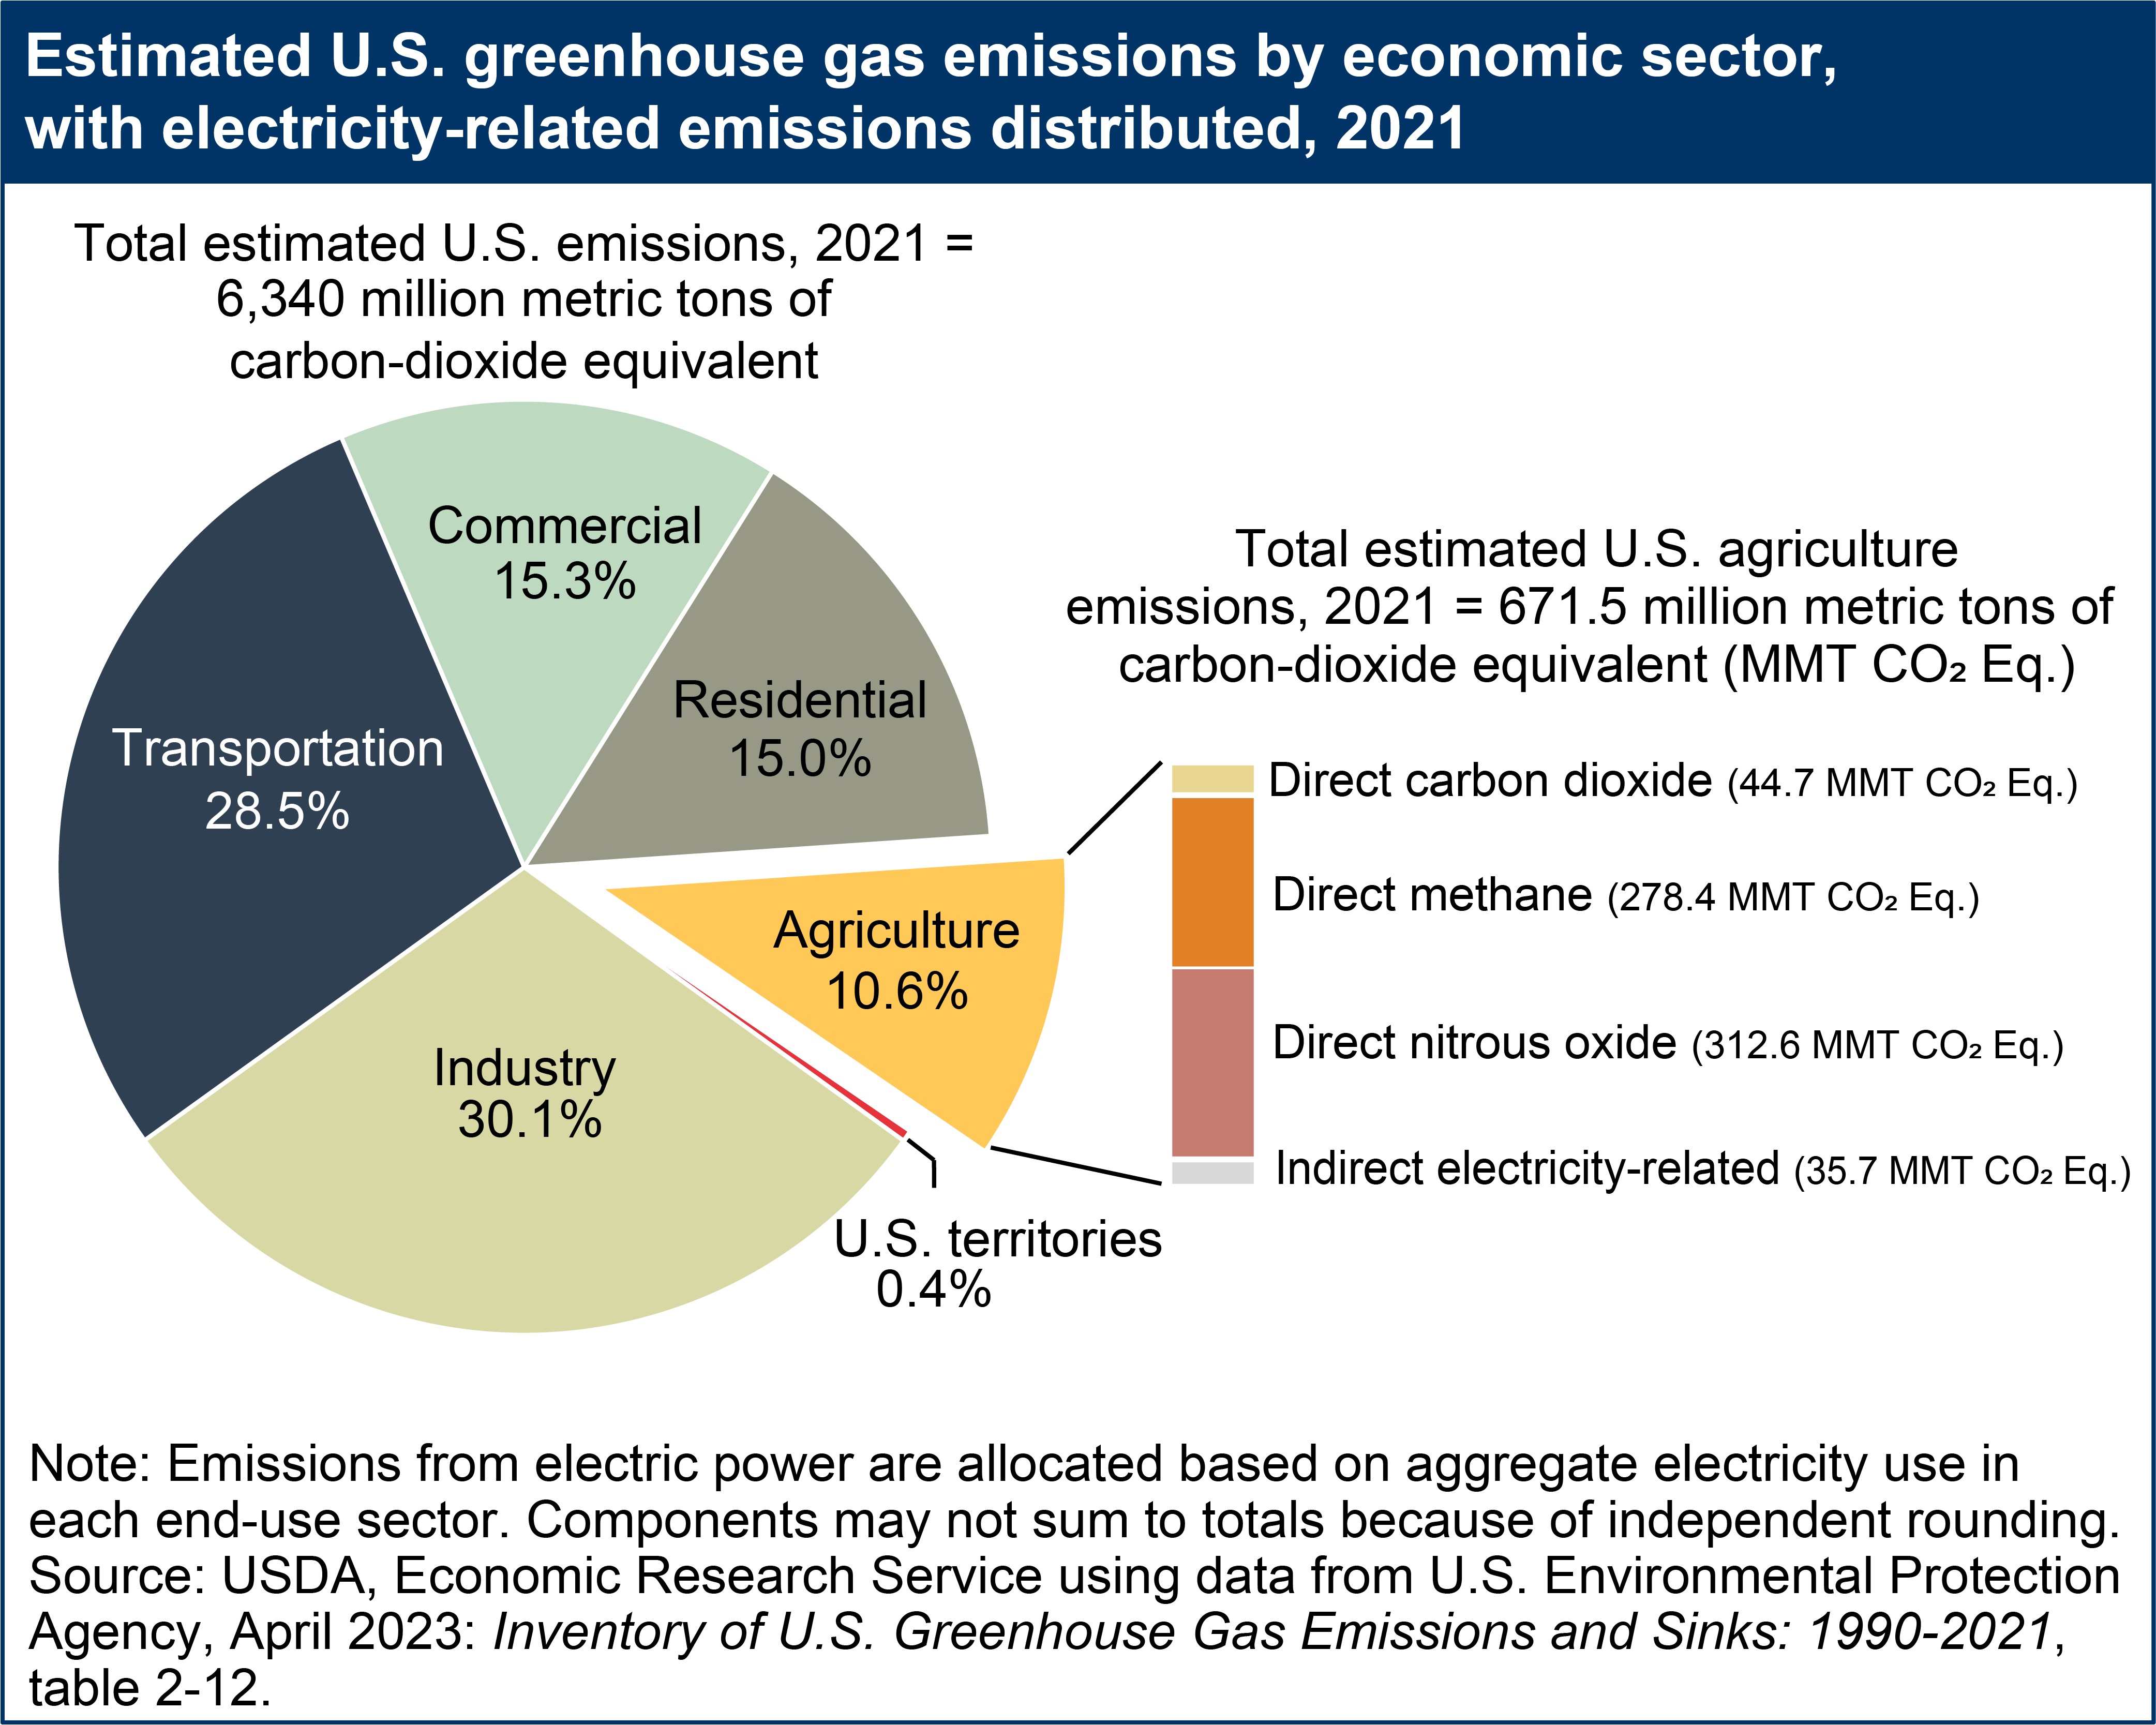 Overview of Greenhouse Gases, Greenhouse Gas (GHG) Emissions